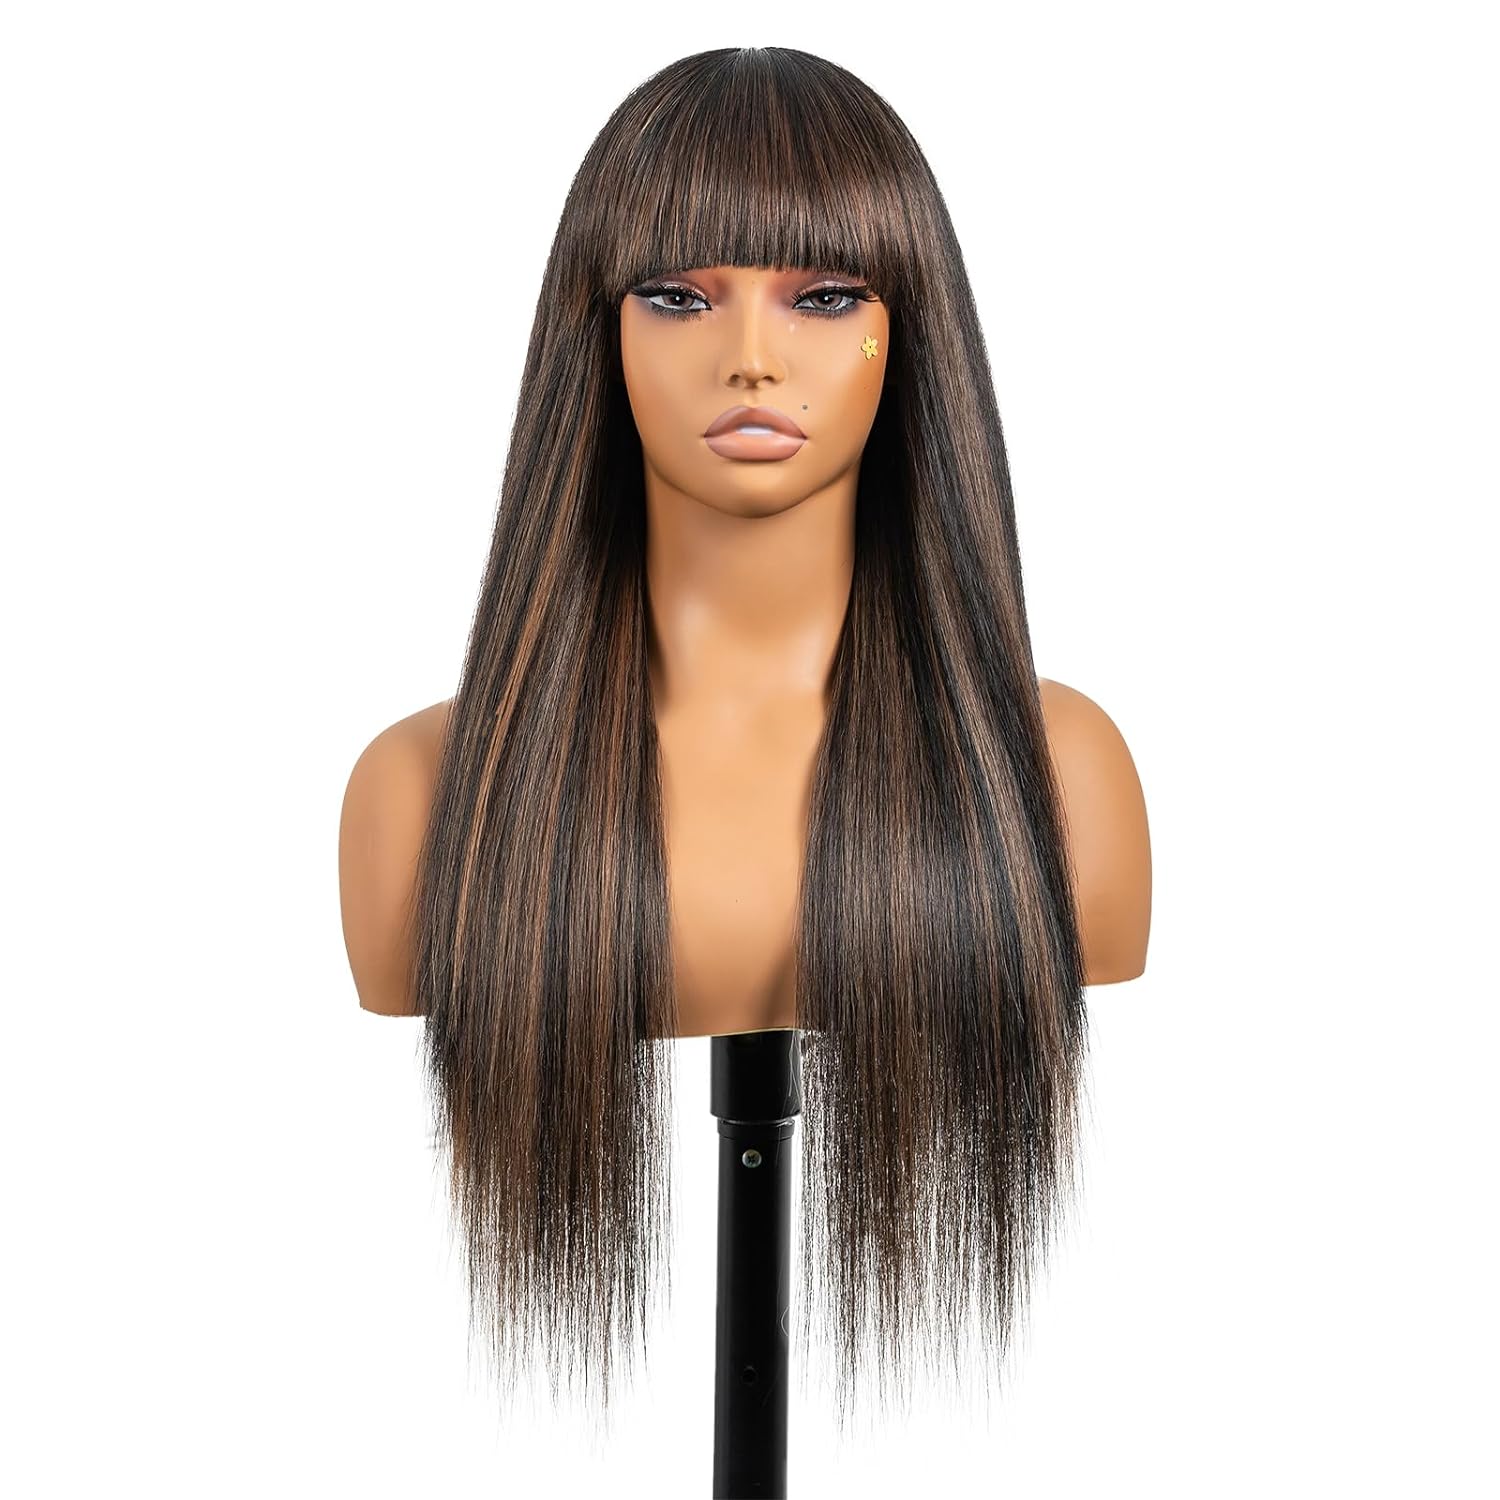 FAST SHIPPING 3-5 DAY SHORT WIG | ToyoTress Short Pixie Wigs With Side Bangs - Jet Black Yaki Straight Hair Daily Costume Wig For Black Women, Soft Light Synthetic Hair Replacement Wigs Heat Resistant